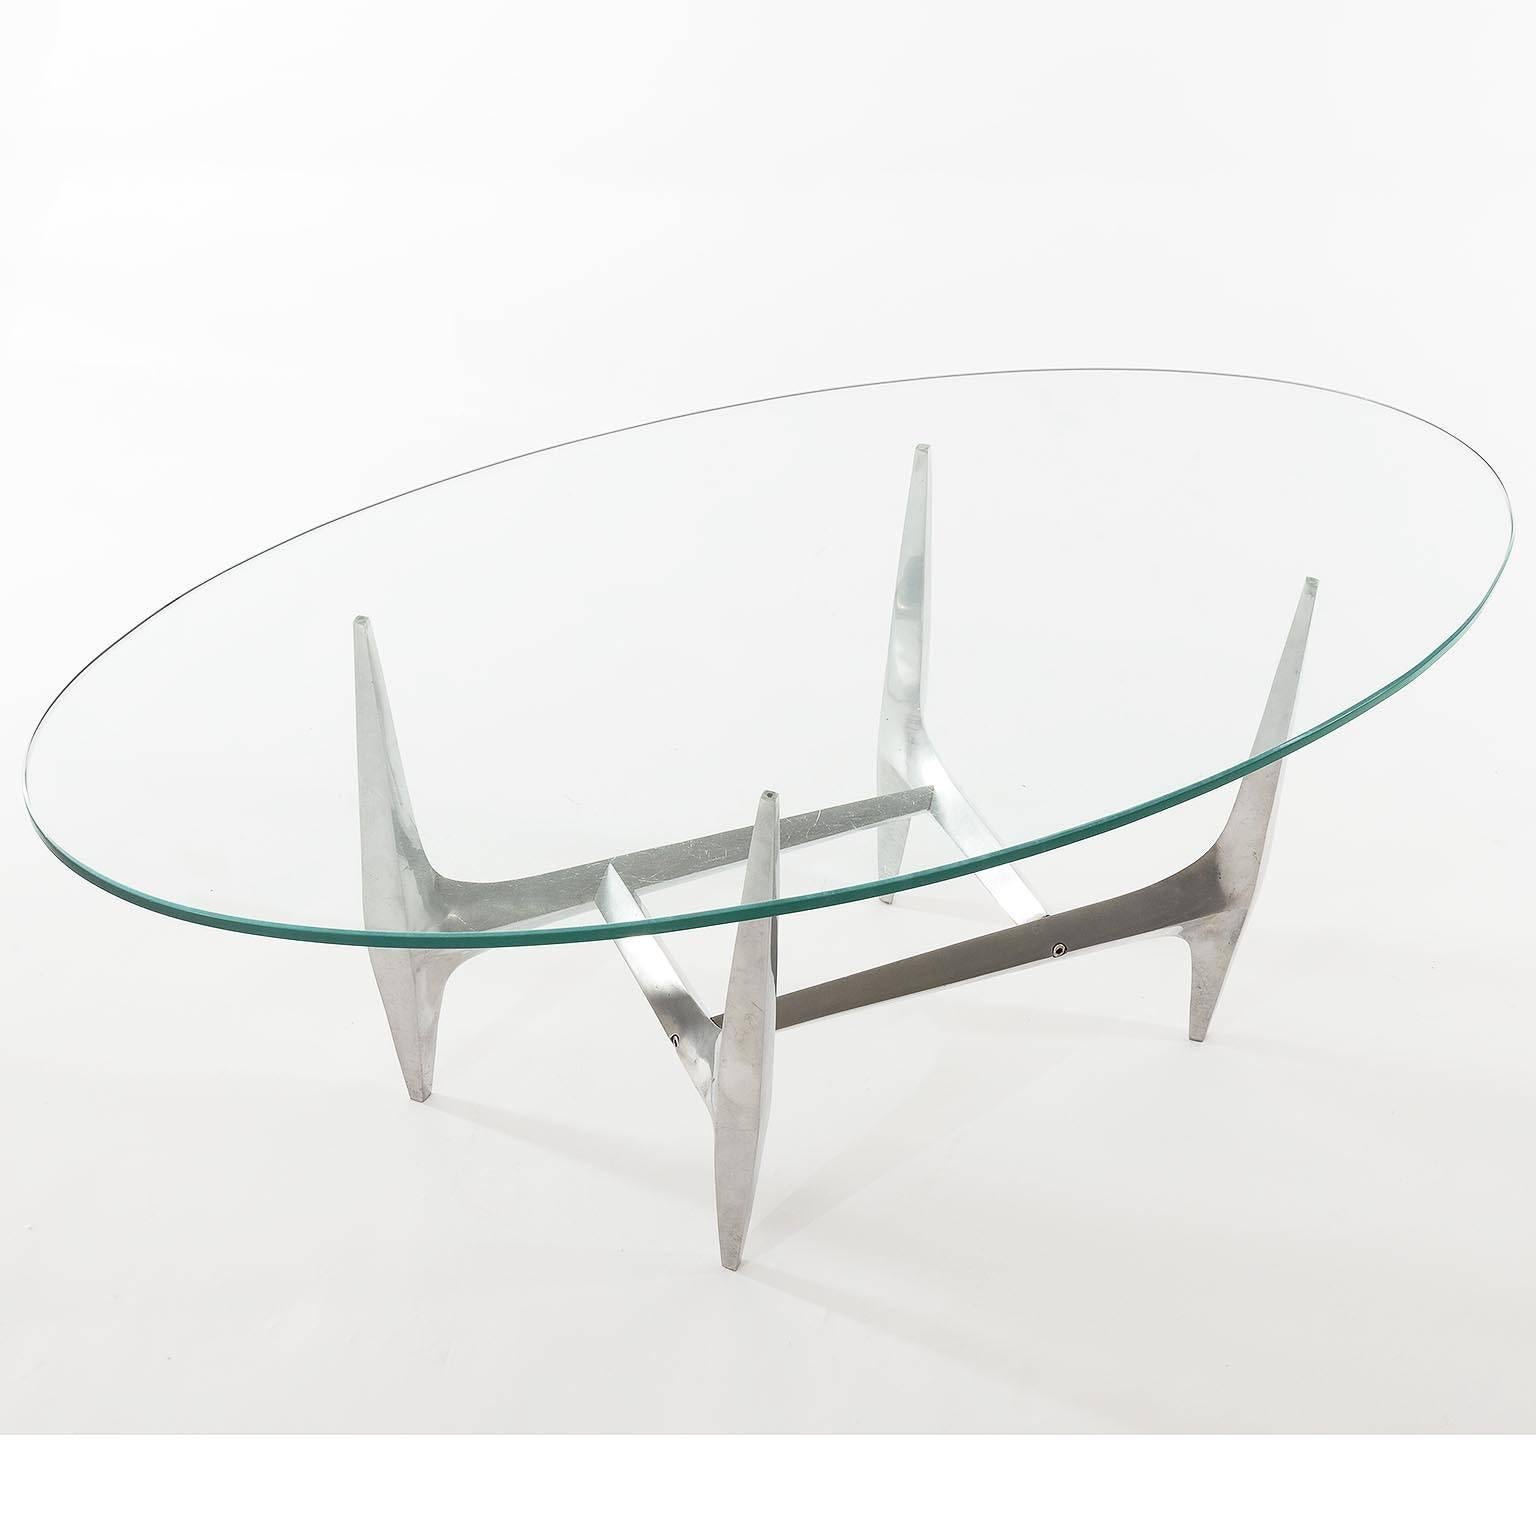 A sculptural coffee or cocktail table by Knut Hesterberg manufactured by Ronald Schmitt, Germany, in Mid-Century at the end of 1960s and the beginning of 1970s.
An oval glass is placed on a polished aluminum base.

Original vintage condition with